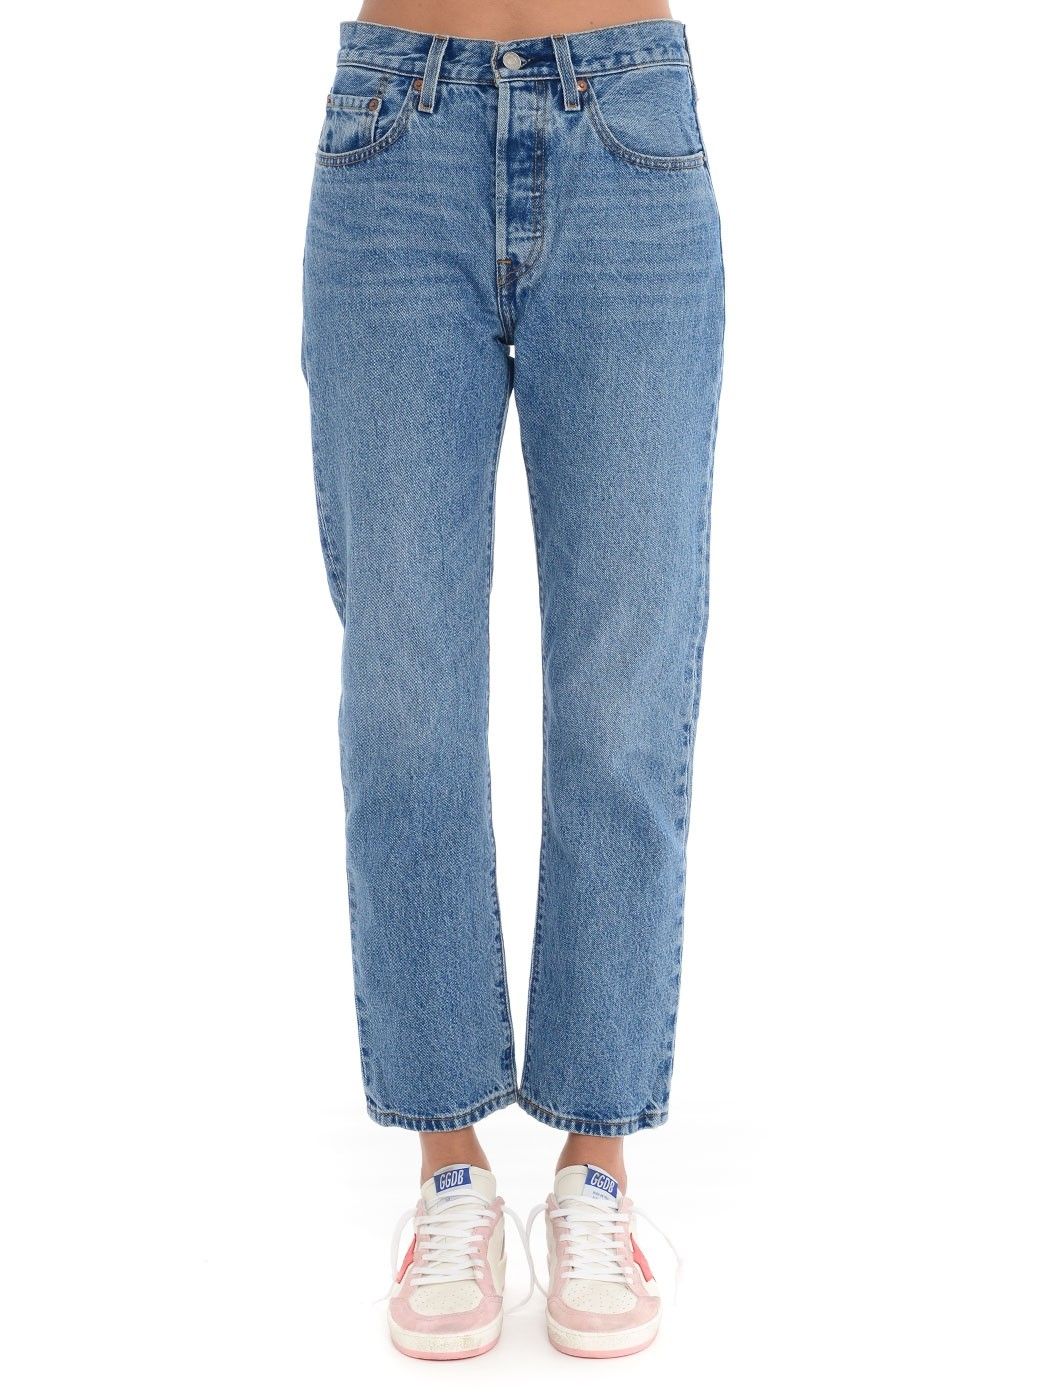  WOMENSWEAR,SPRING SUMMER COLLECTION  LEVI'S 36200